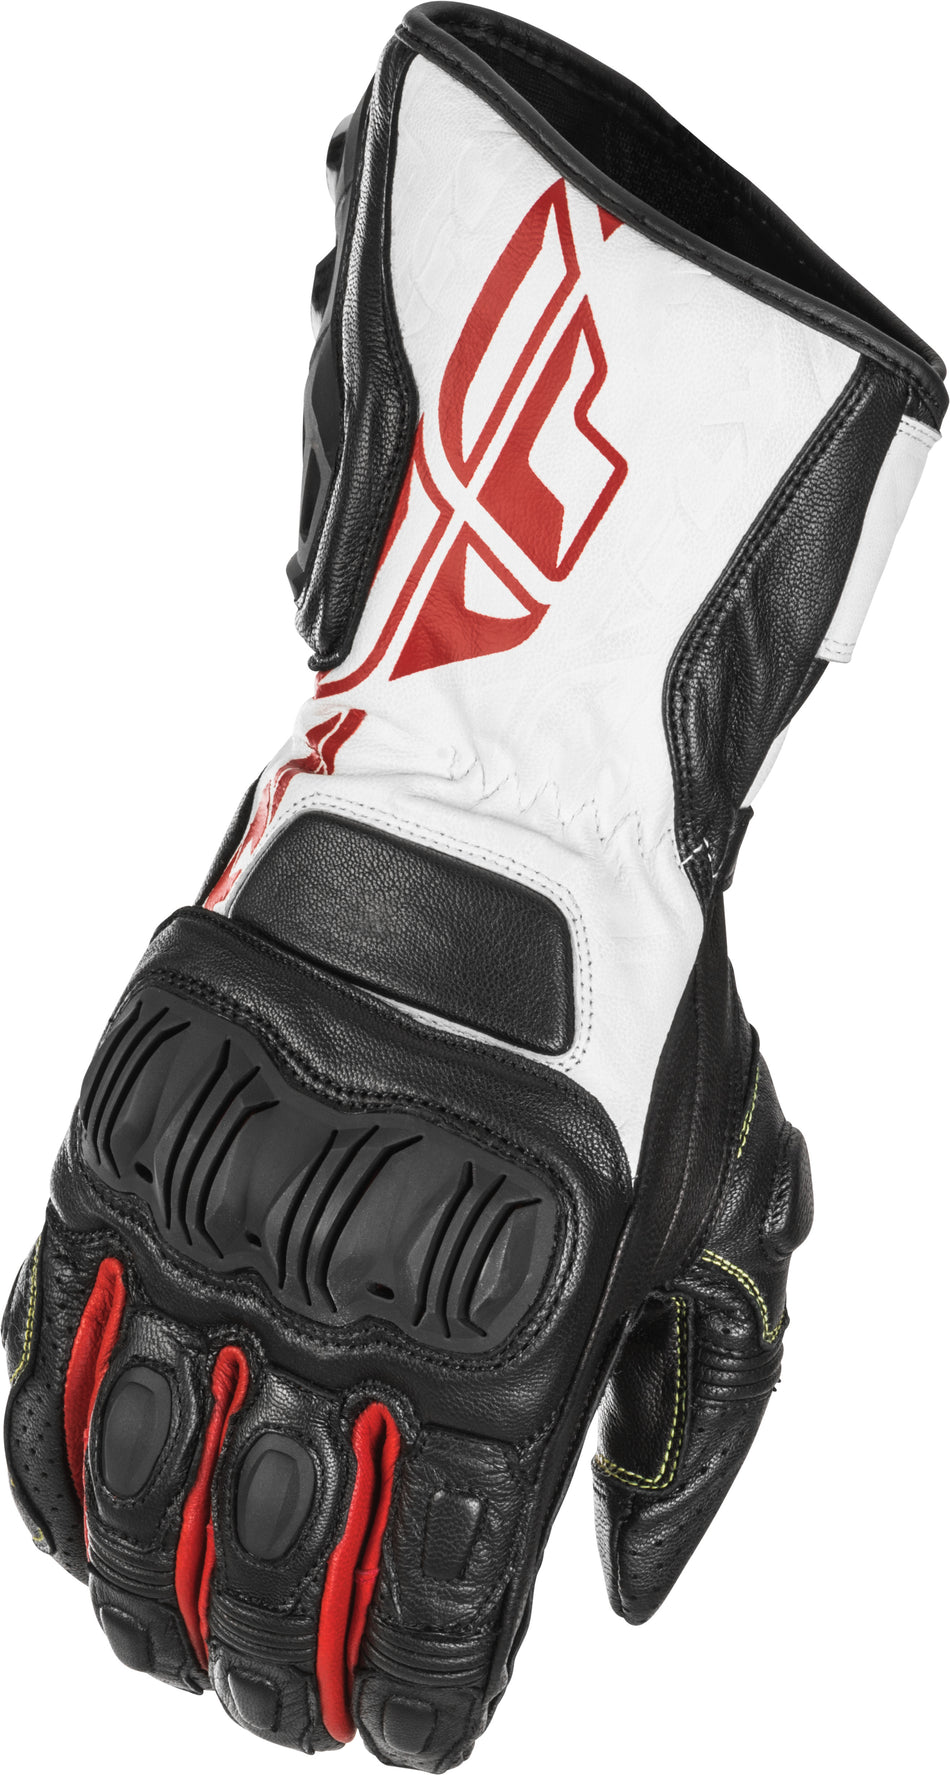 FLY RACING Fl-2 Gloves Black/White/Red 3x #5884 476-2081~7